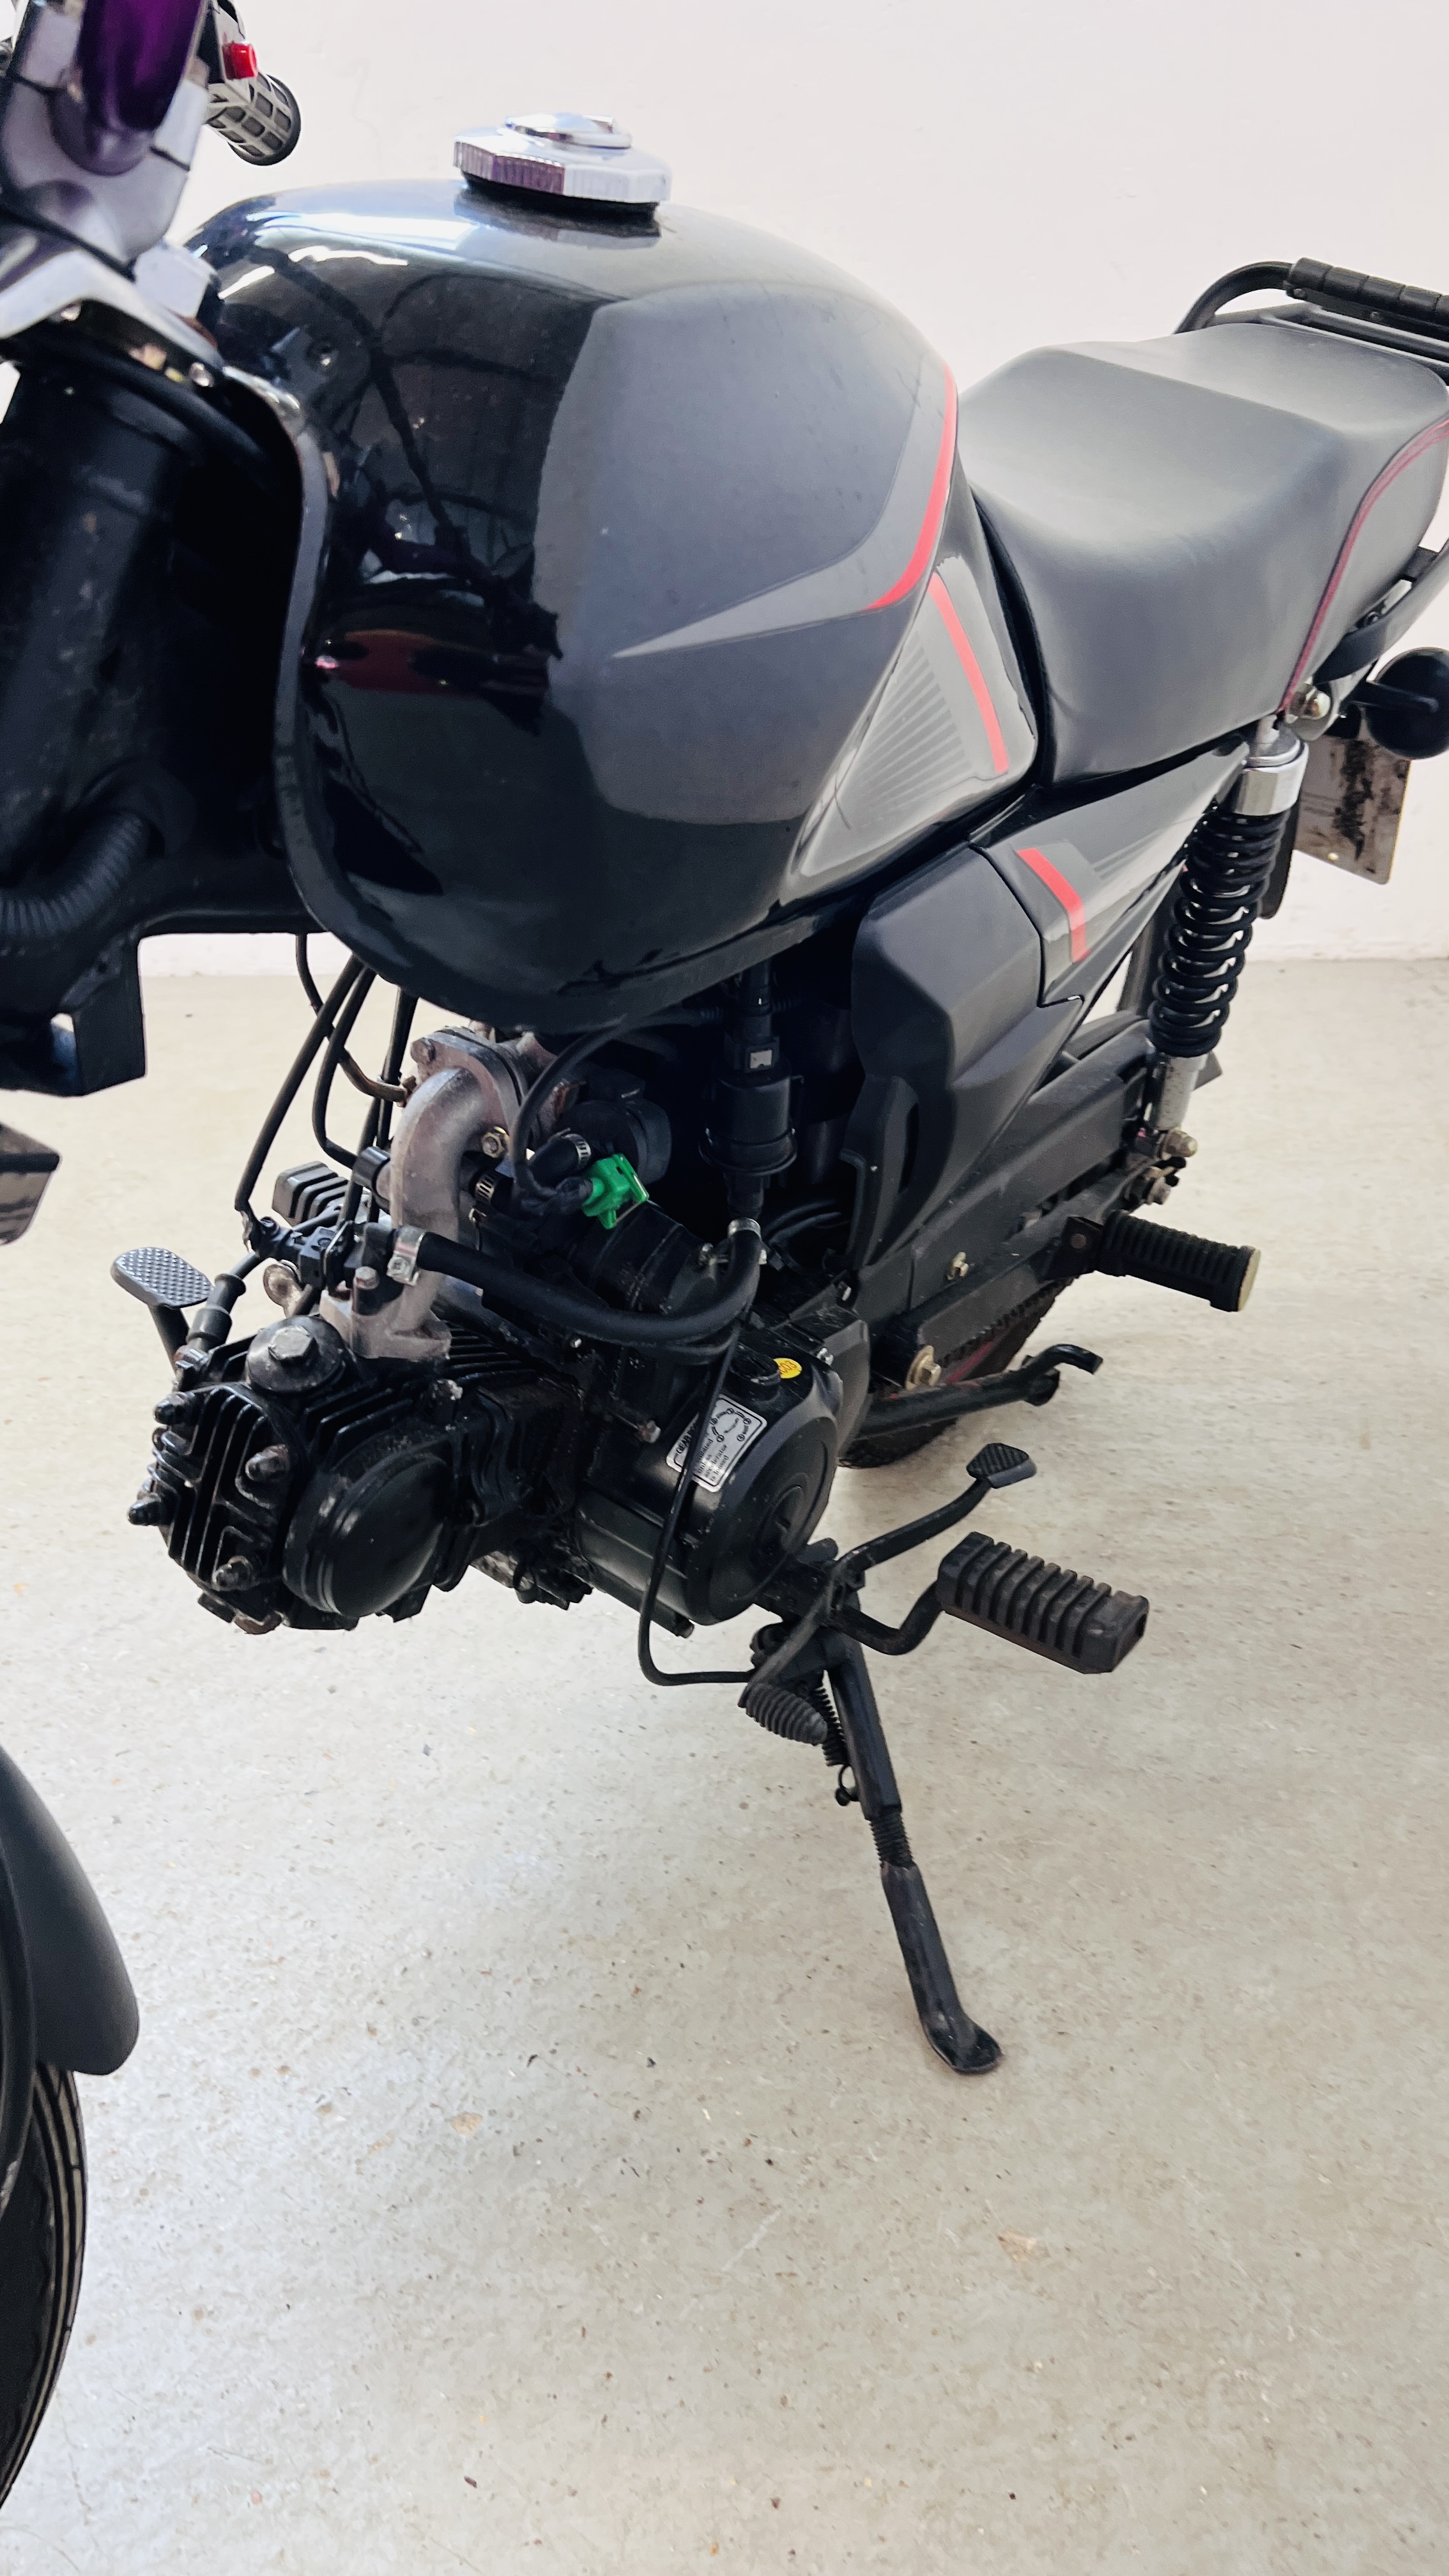 CHAMP 48CC MOTOR CYCLE. VRM - KX69 CHD. FIRST REGISTERED: 01/10/2019. MOT EXPIRED: 30/09/2022. - Image 17 of 22